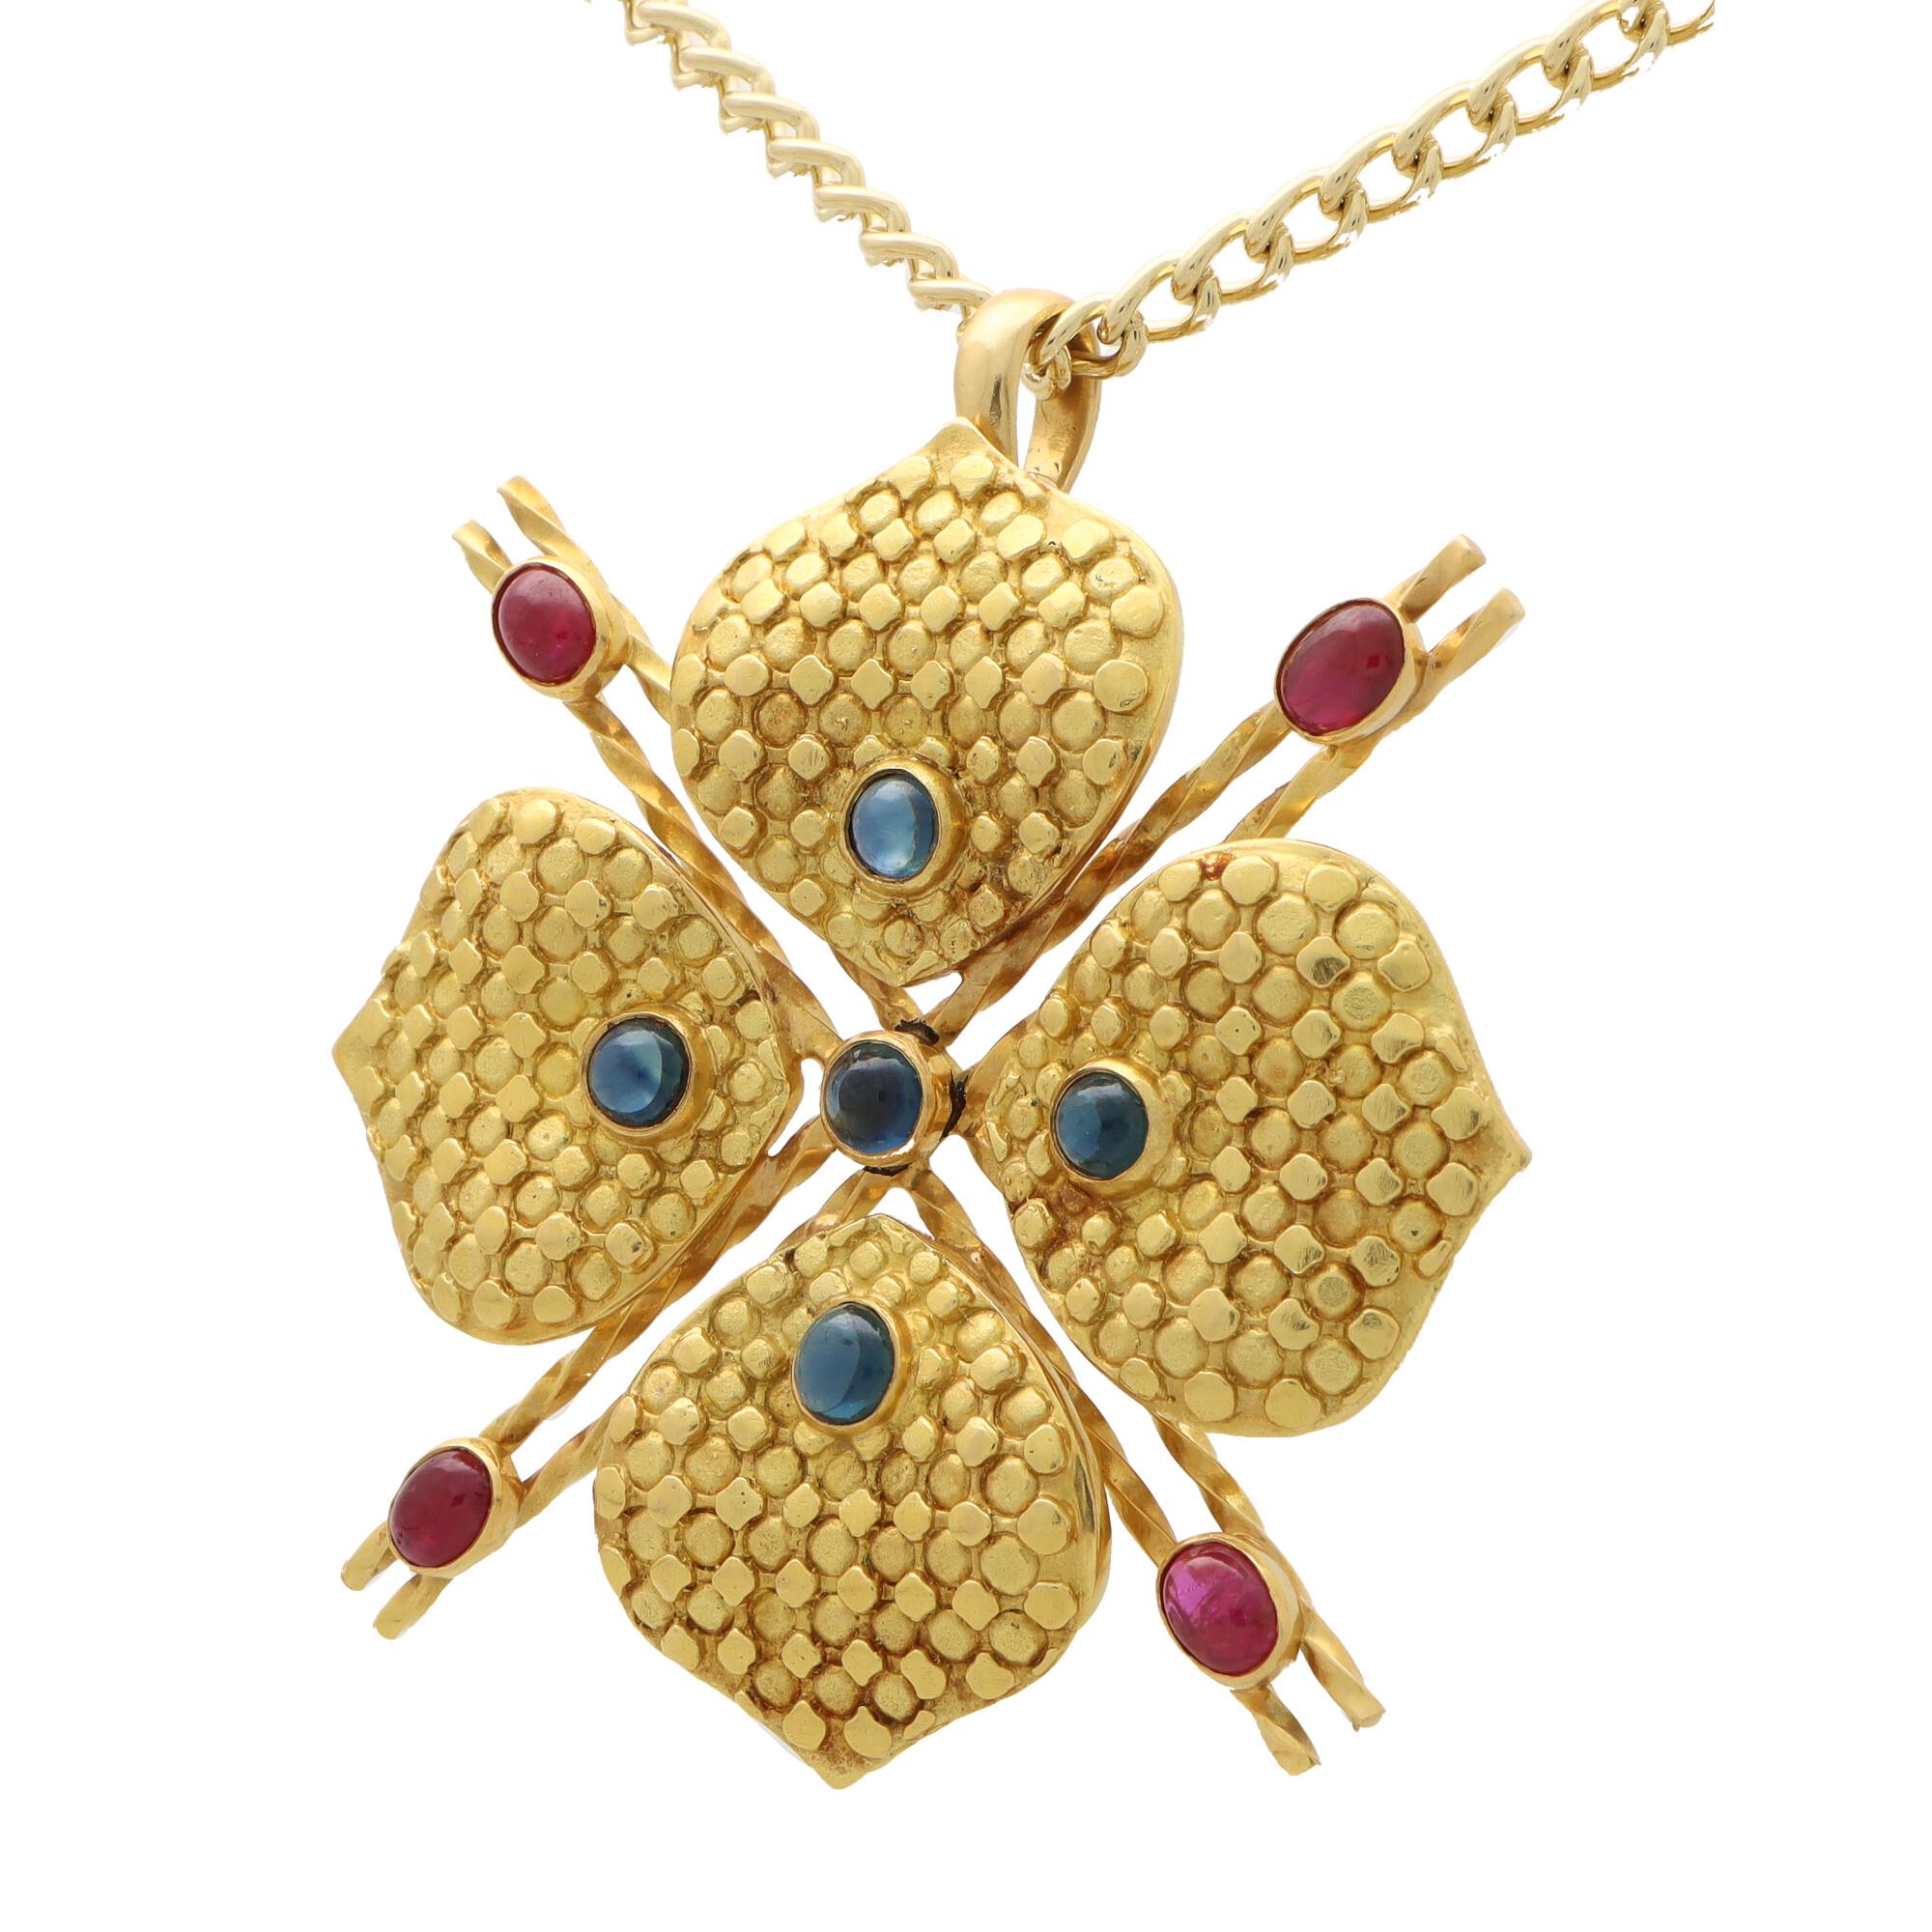 A beautiful vintage French ruby and sapphire clover pendant set in 18k yellow gold.

The pendant is designed as a clover on top of an openwork double X motif. Each of the four clover leaves is bezel set with a circular cabochon sapphire and